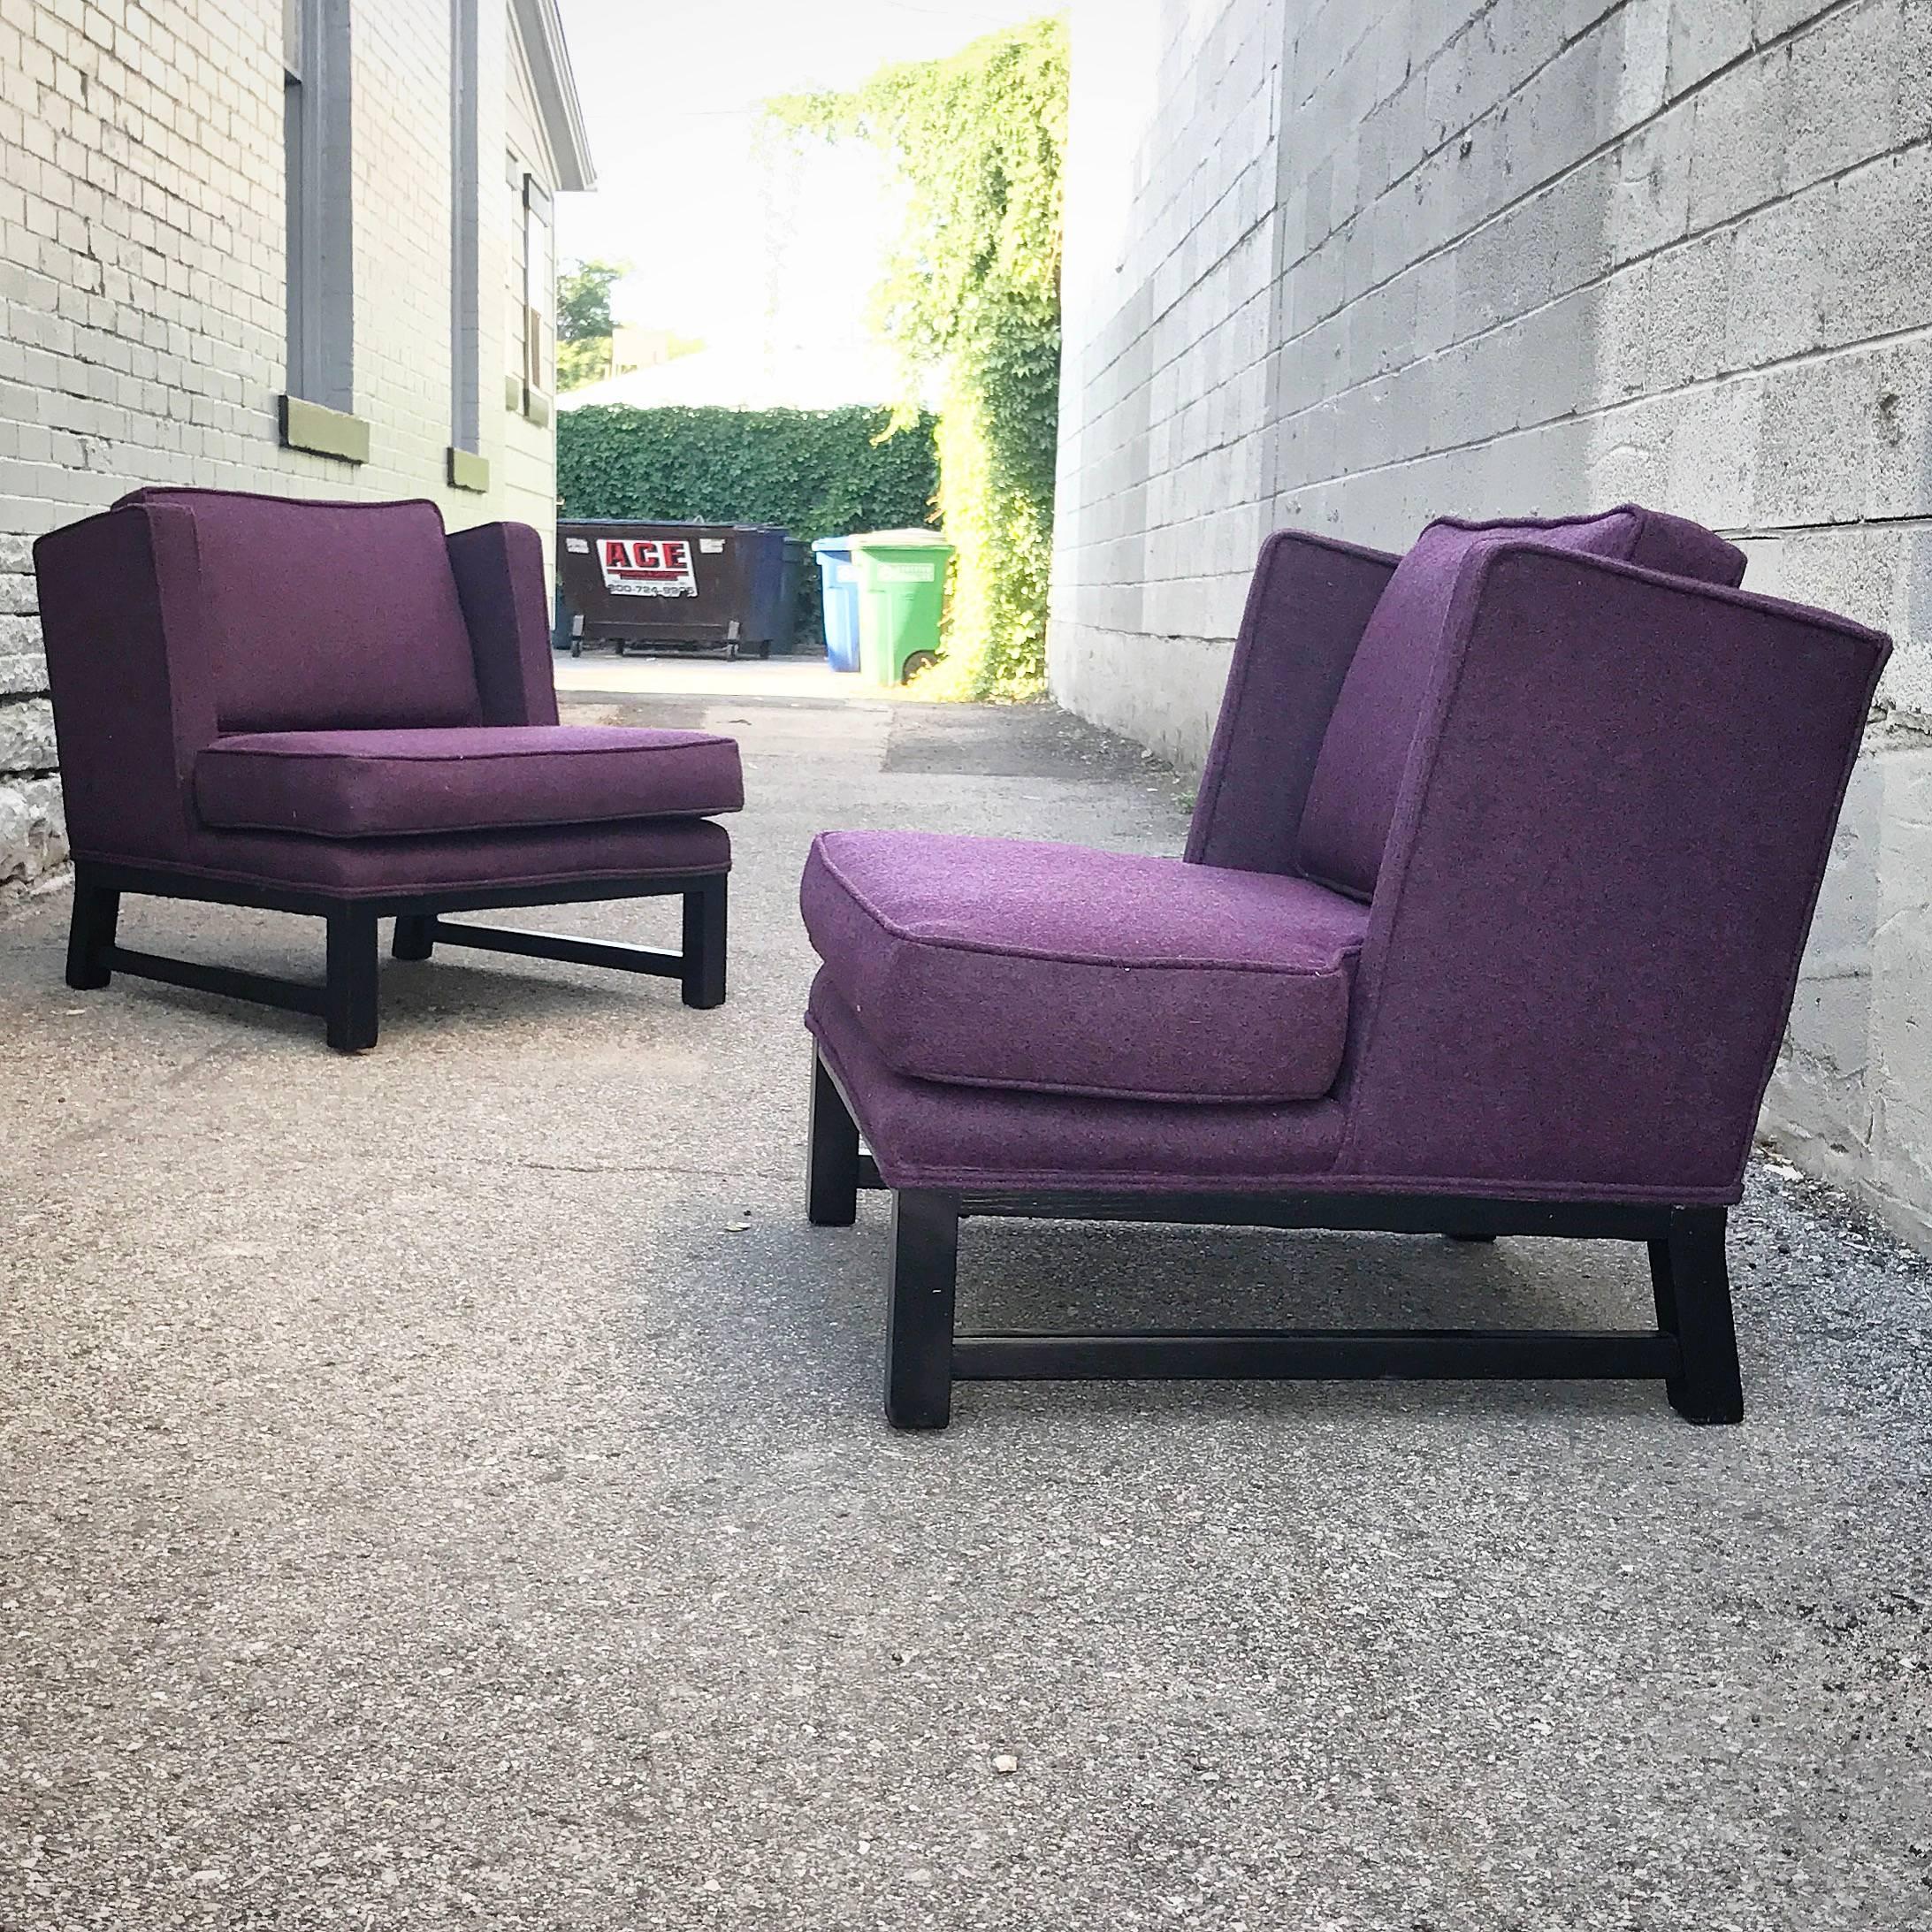 Pair of Lounge Chairs in Maharam Wool Reminiscent of Dunbar Designs In Excellent Condition For Sale In Salt Lake City, UT